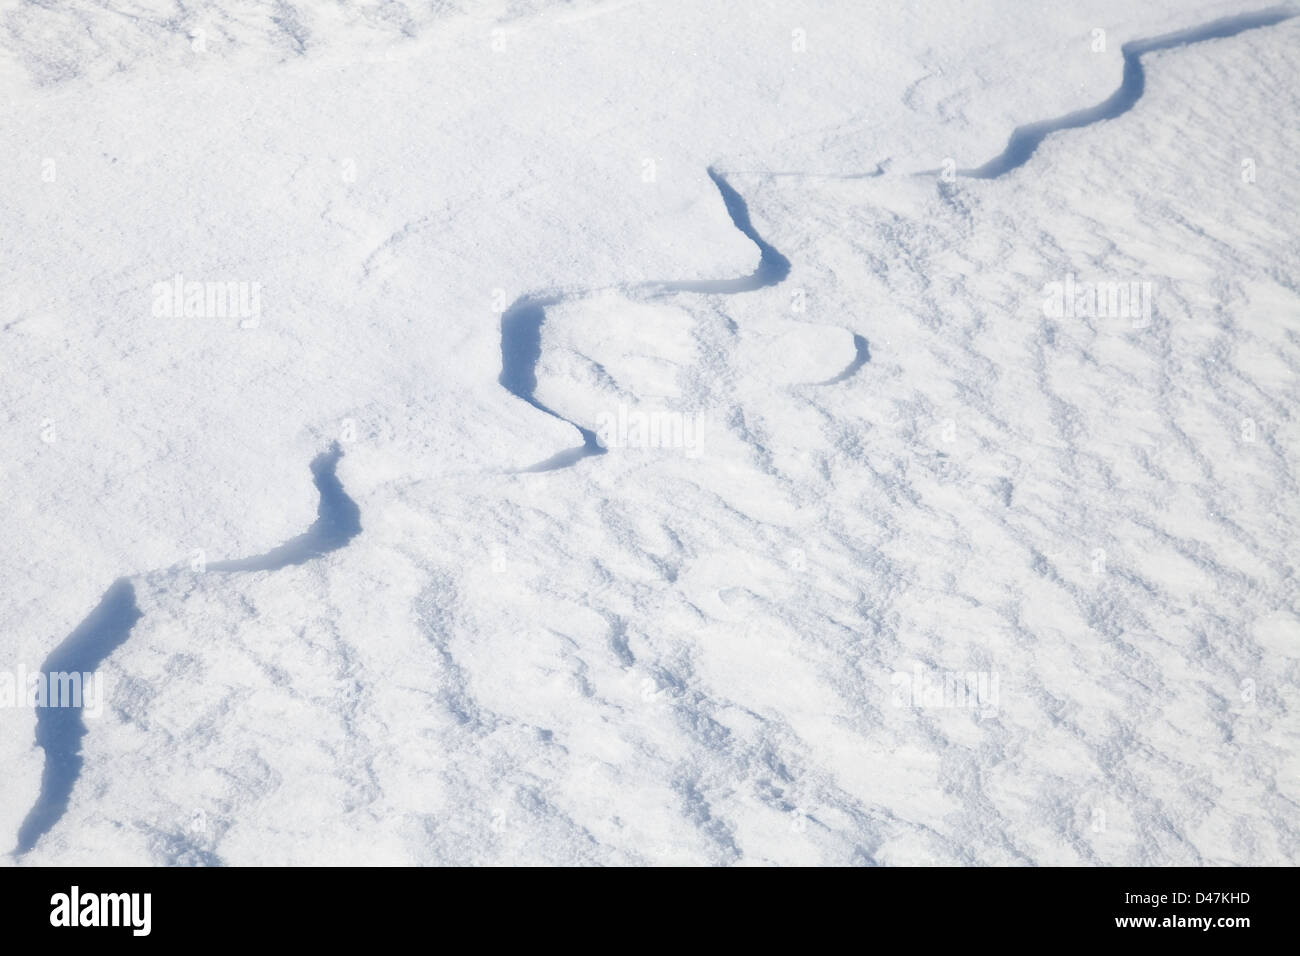 Texture of snowdrift with nice curved shadows Stock Photo